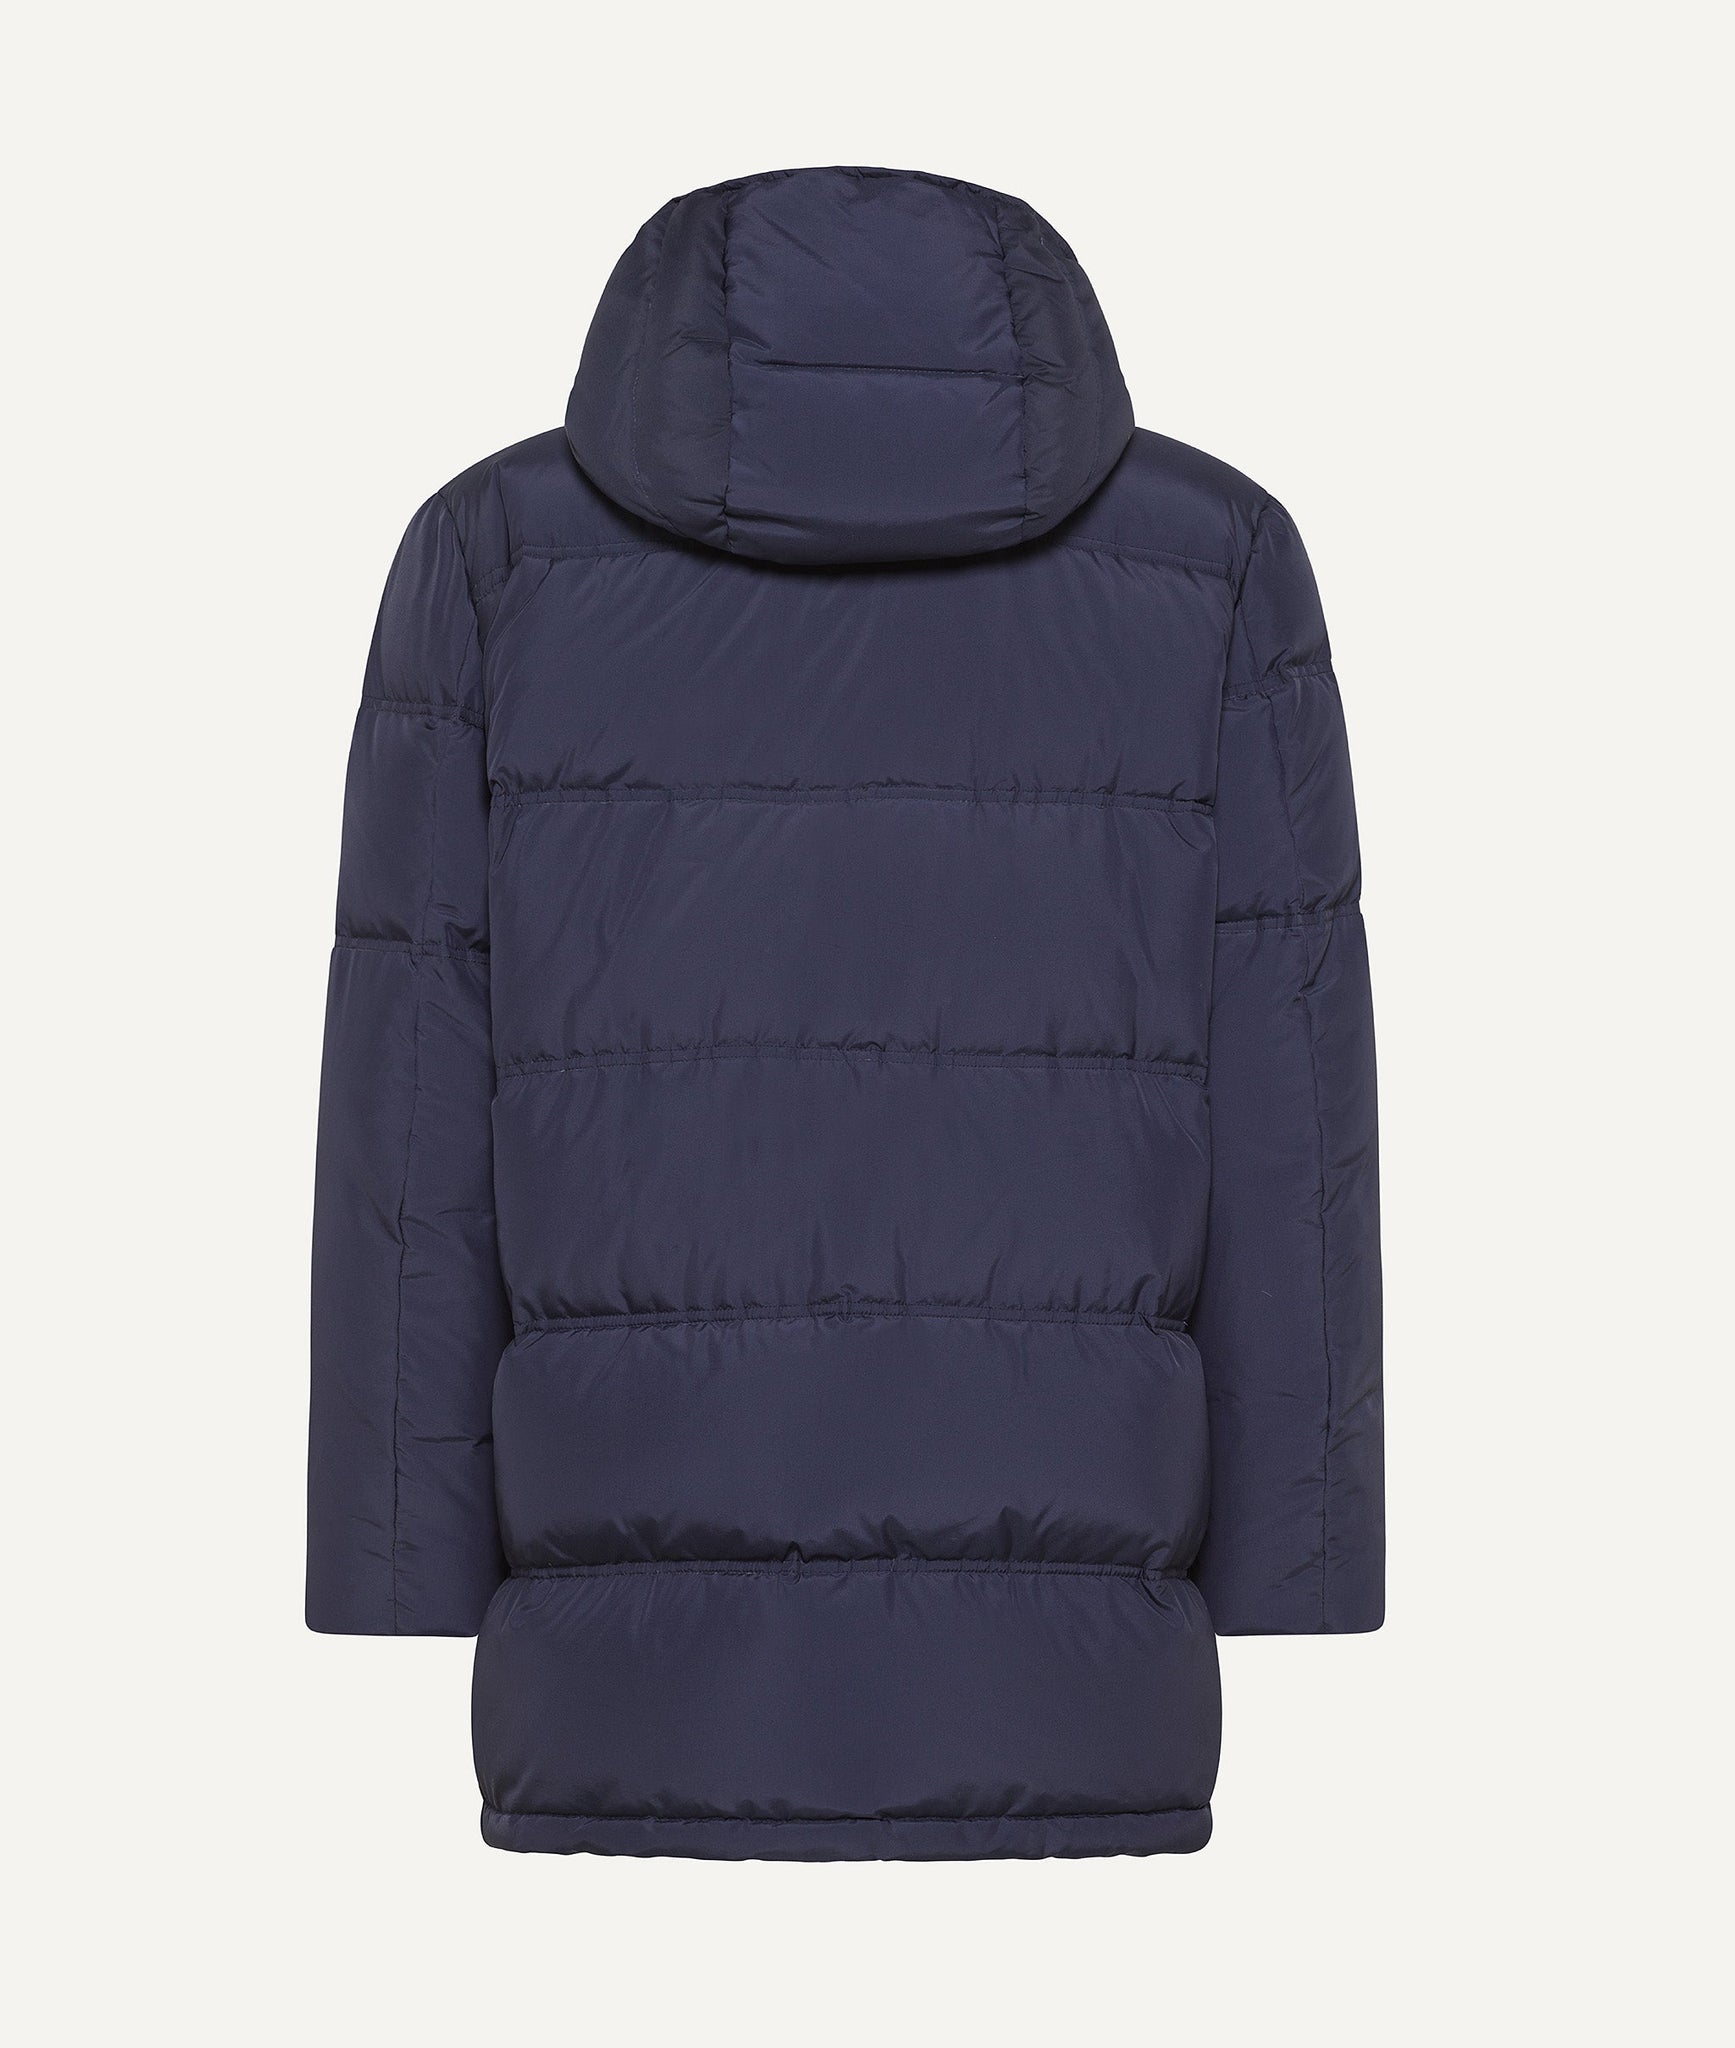 Eleventy - Down Jacket in Polyester